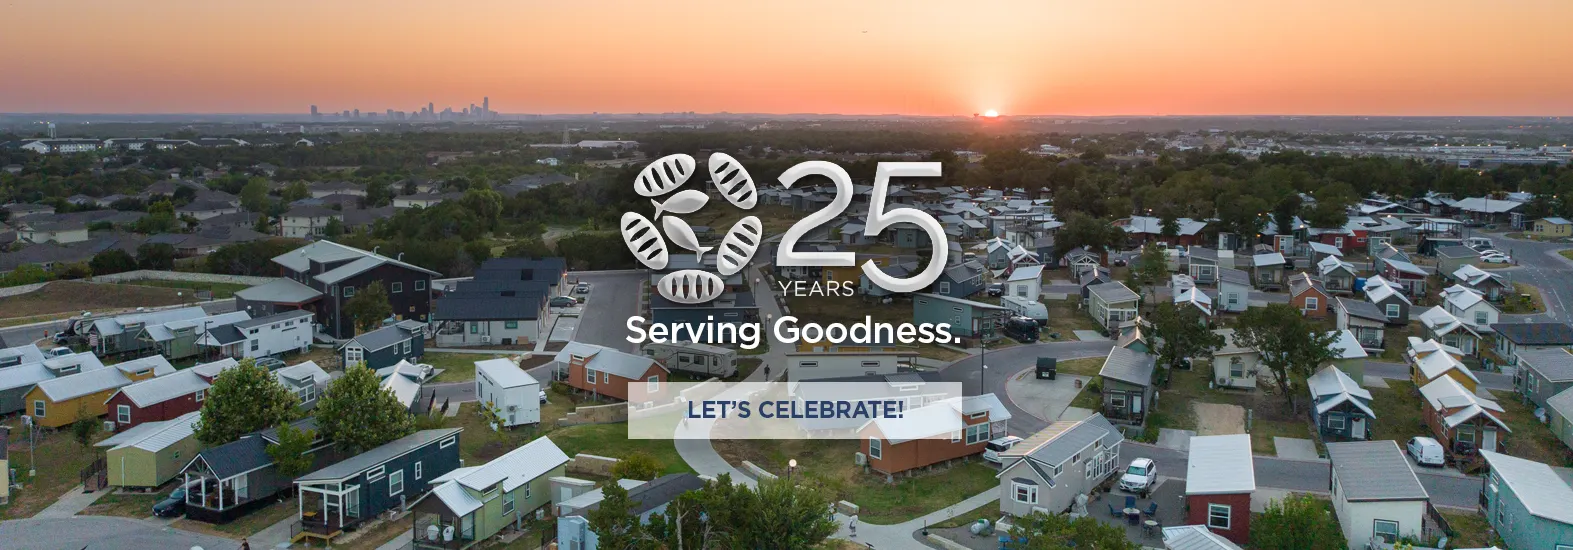 25 years serving goodness. let's celebrate